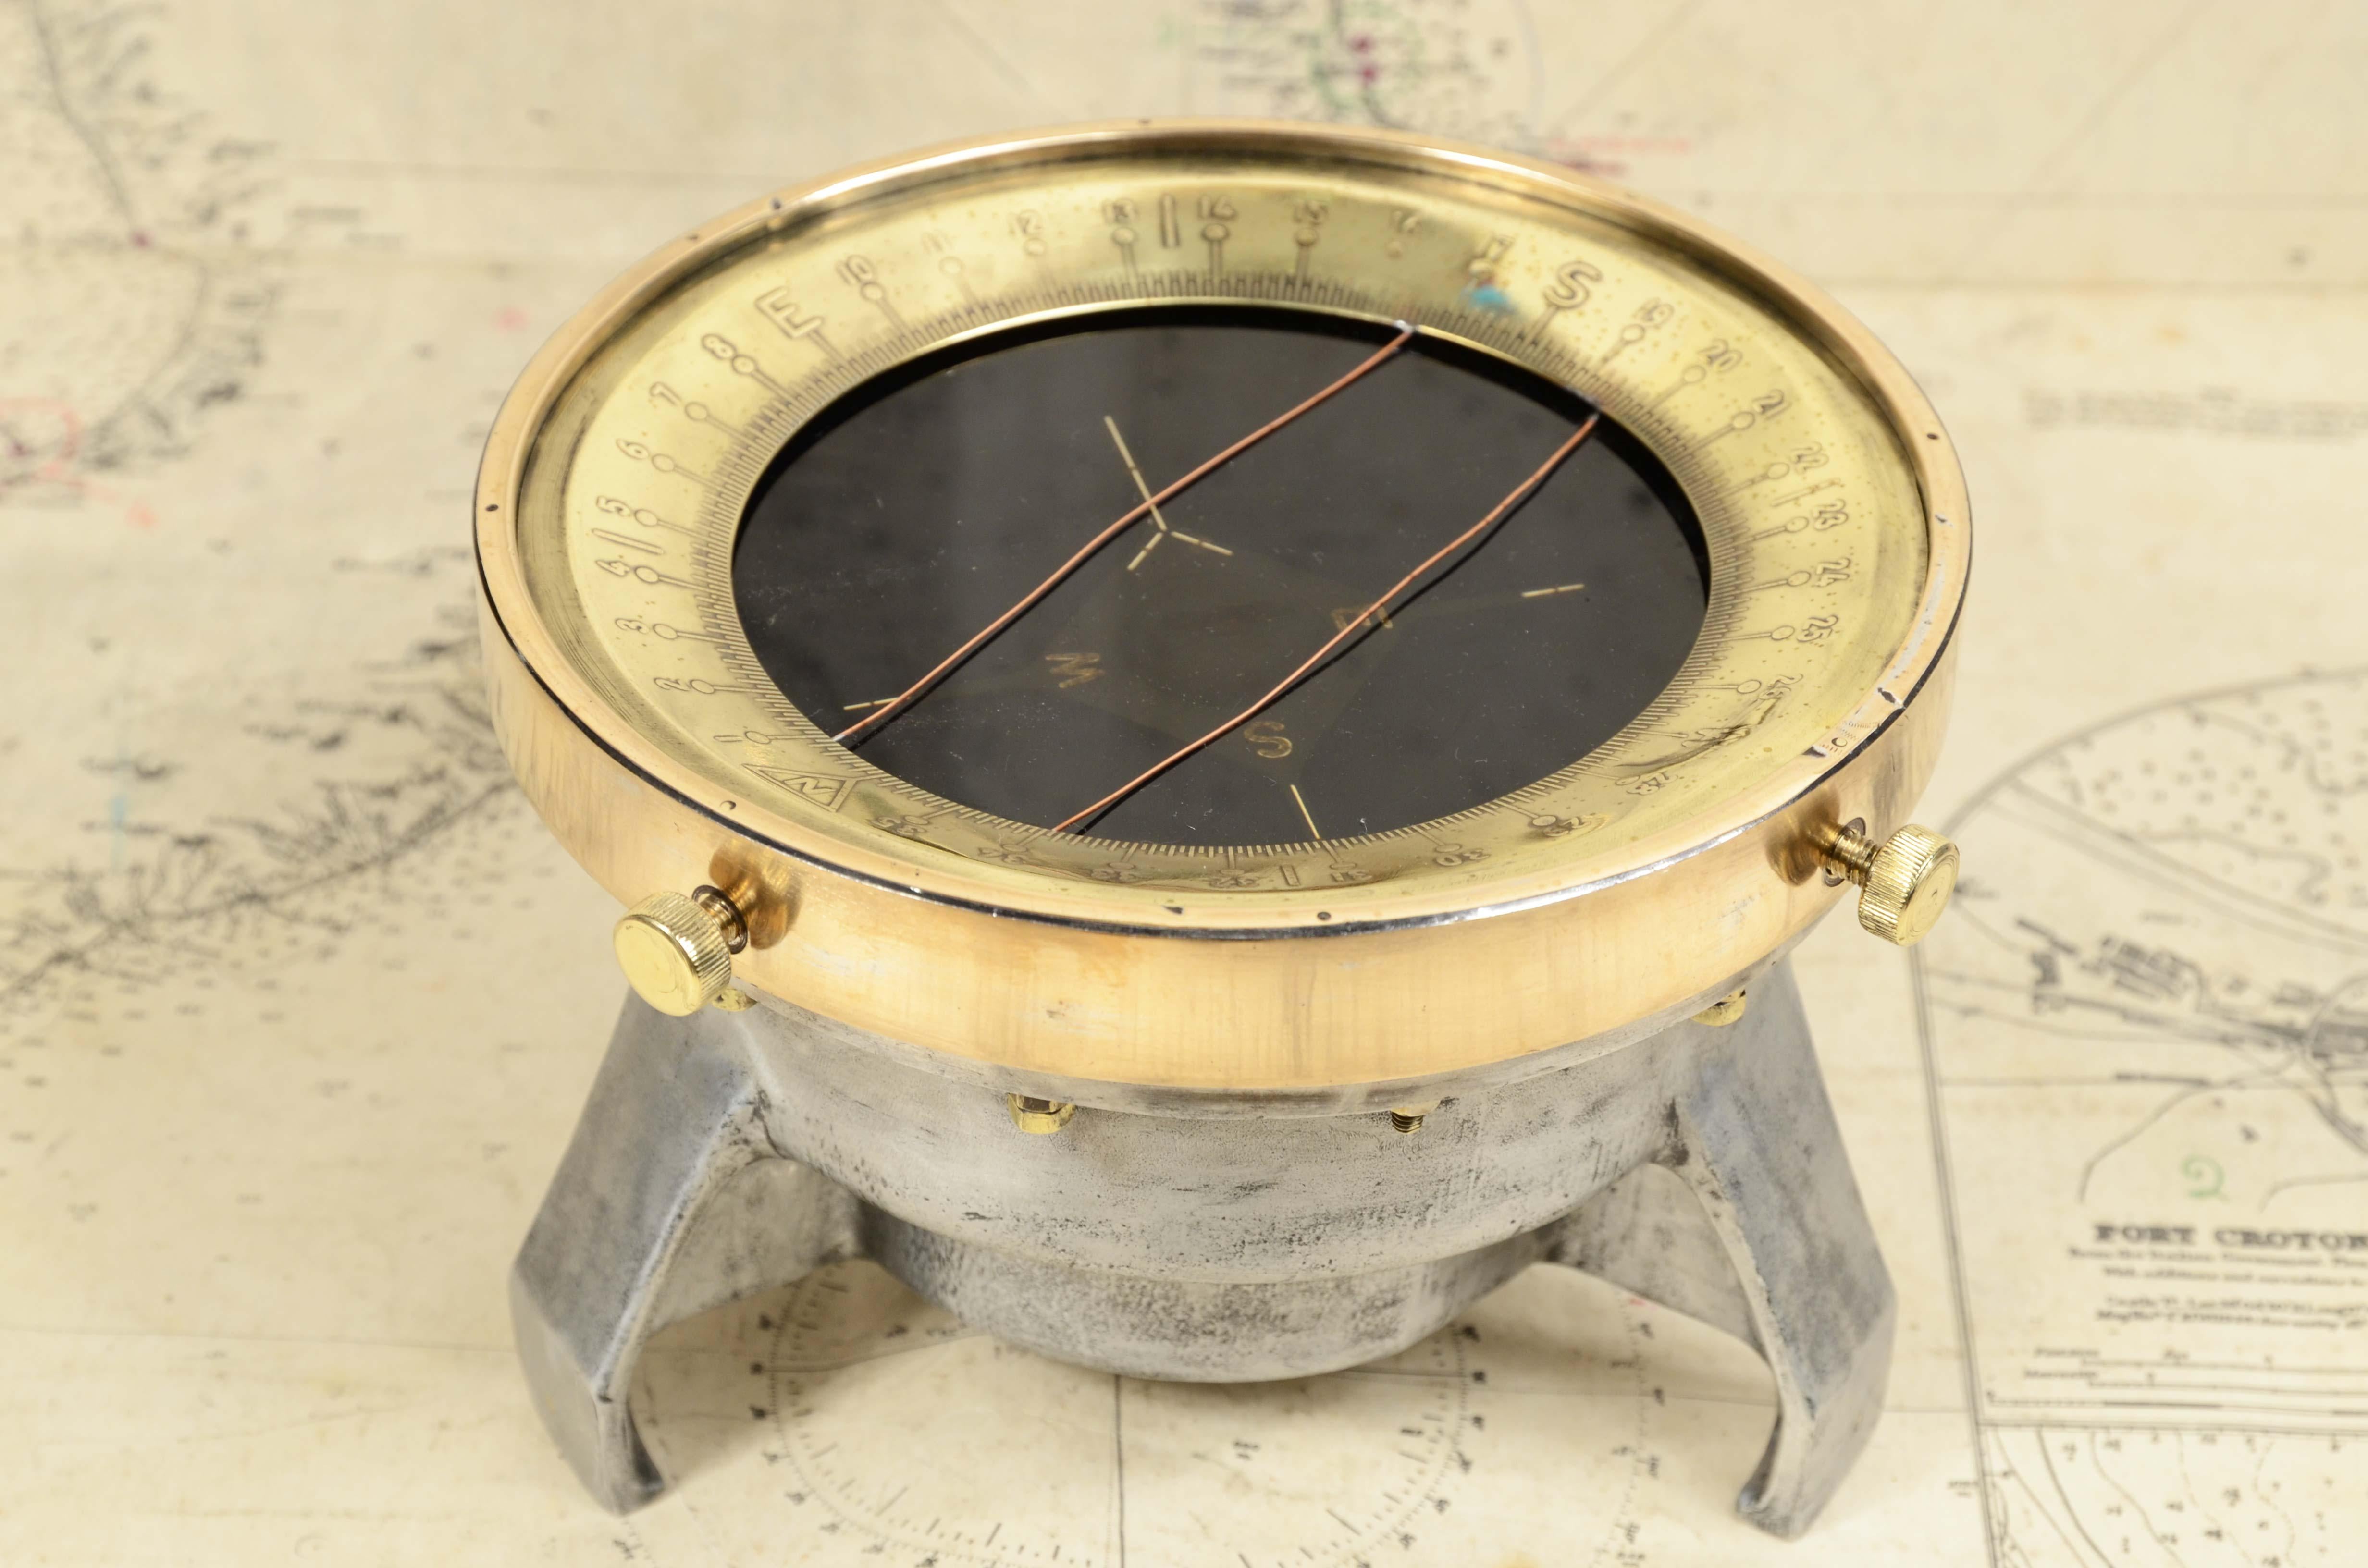 Brass and aluminum aviation compass complete with azimuth circle 1940 U.S.A For Sale 4